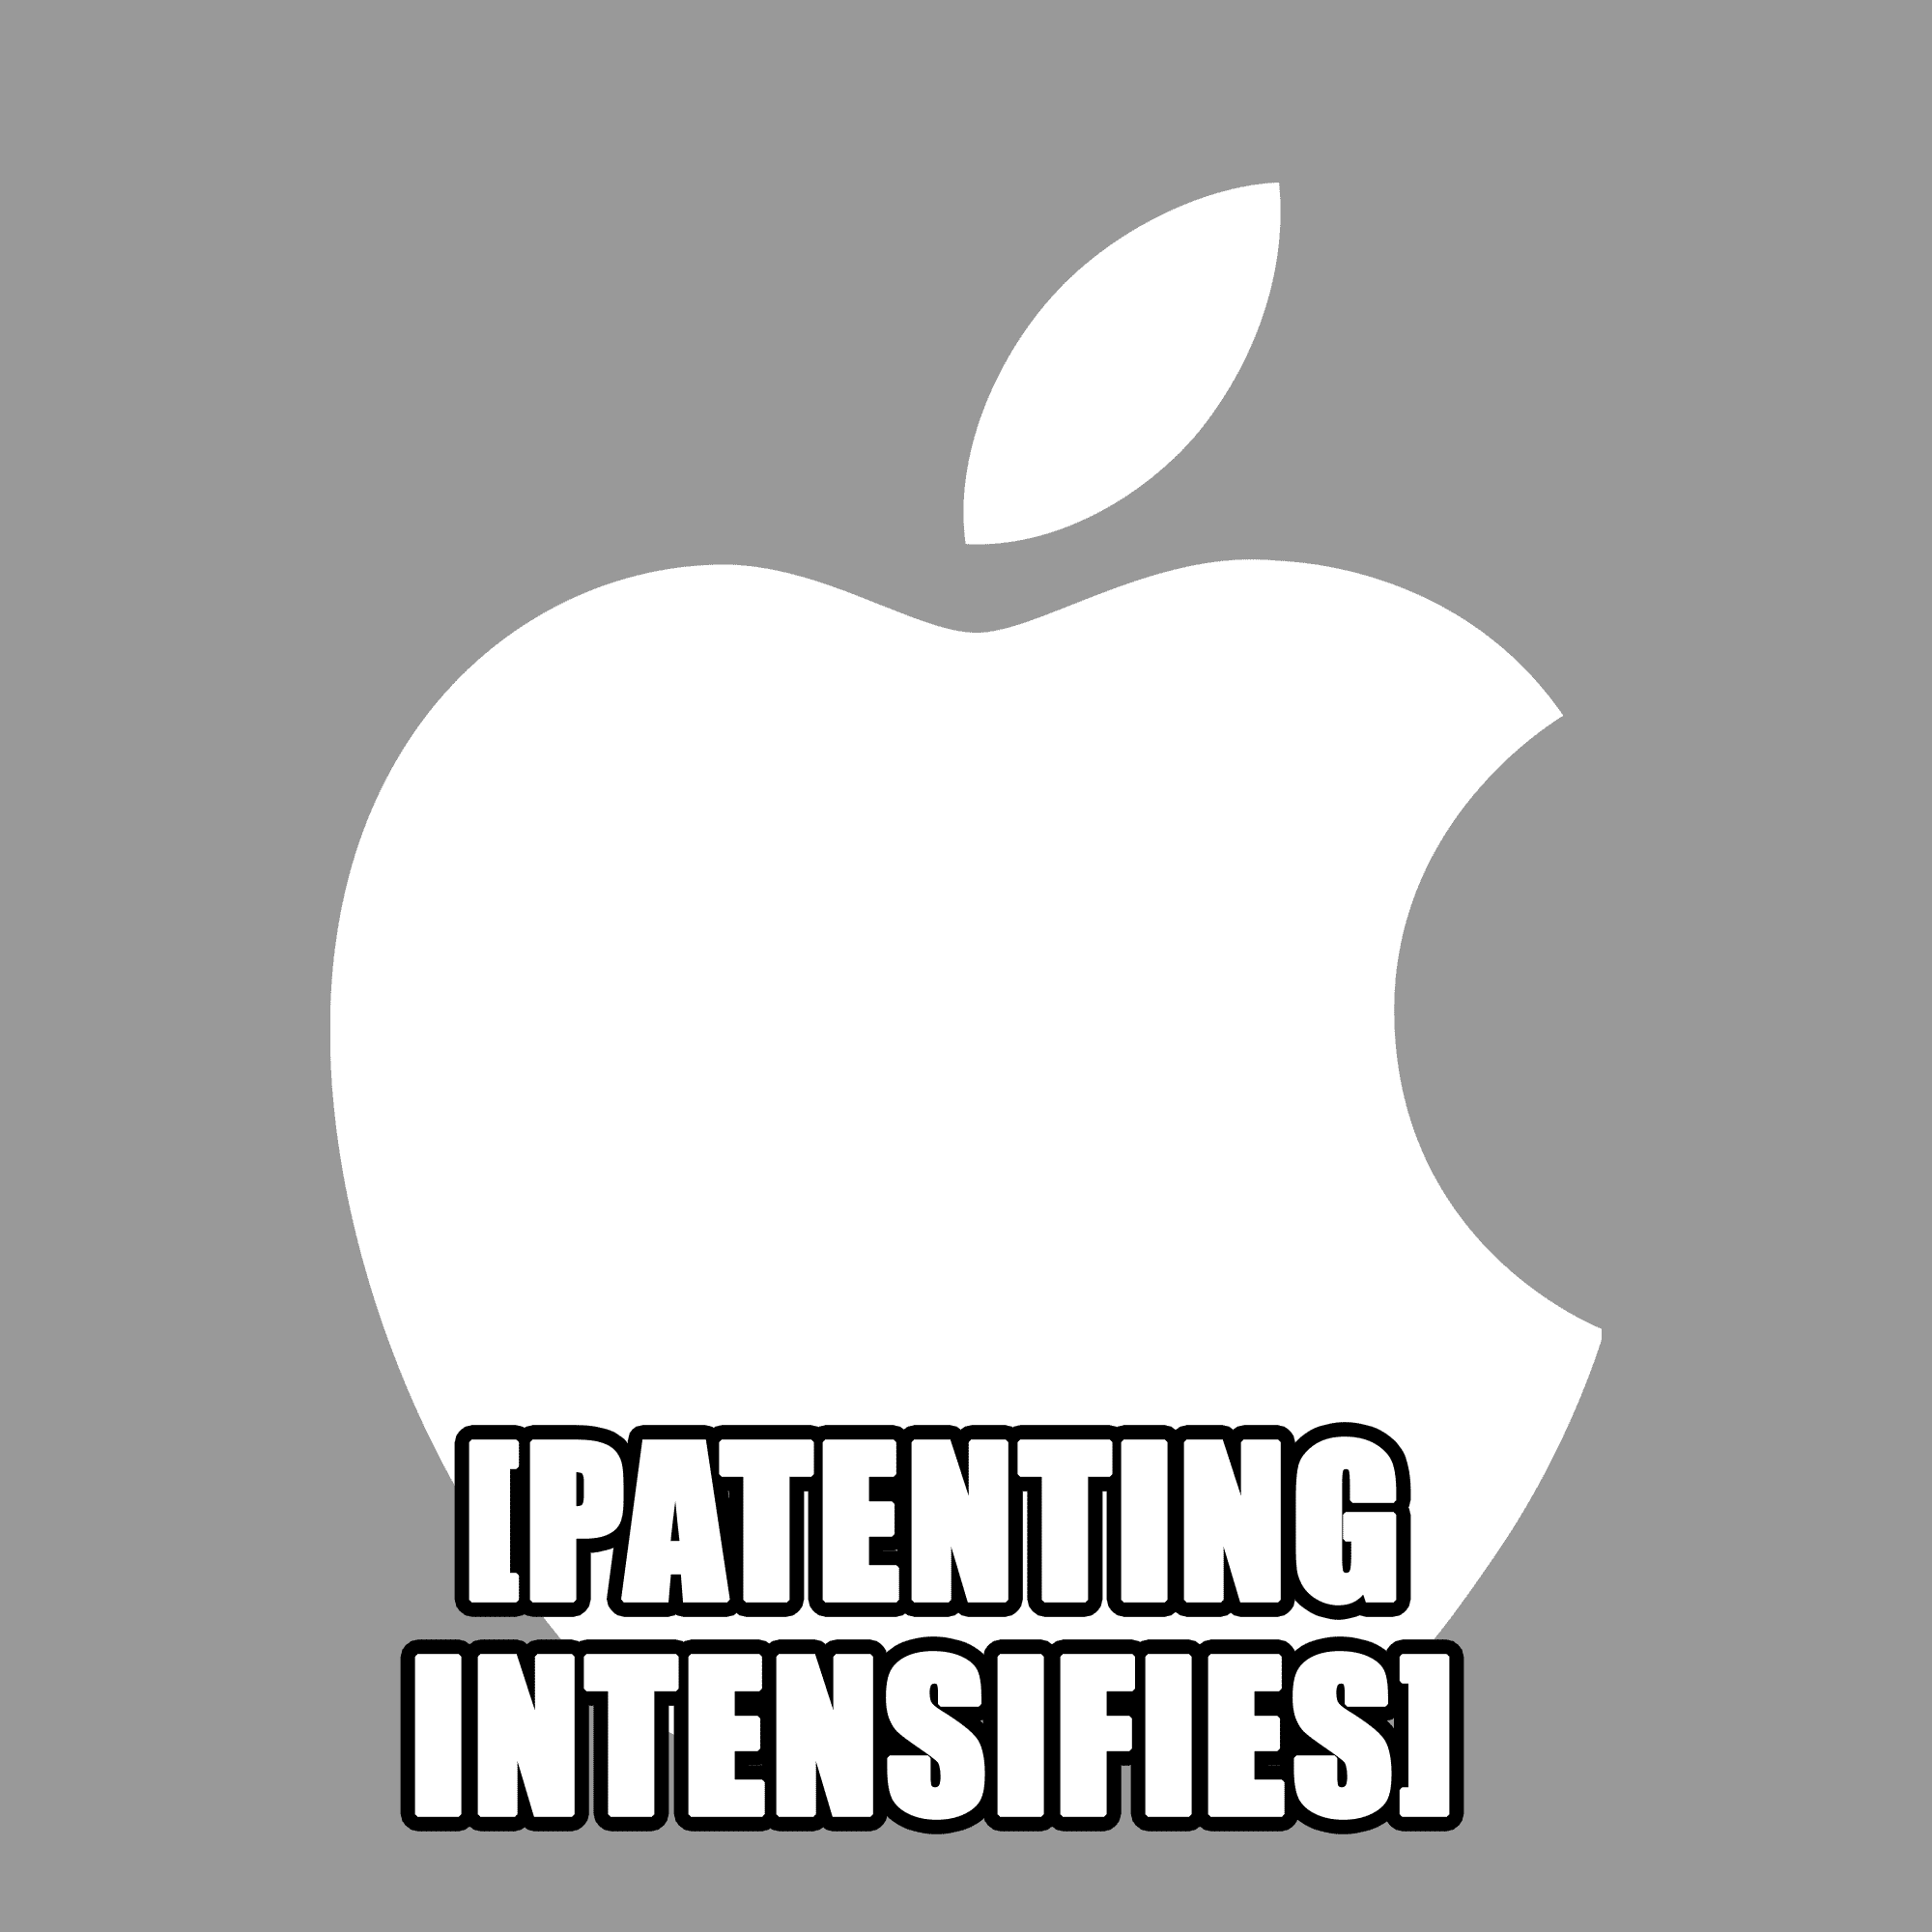 patenting intensifies media.giphy.com